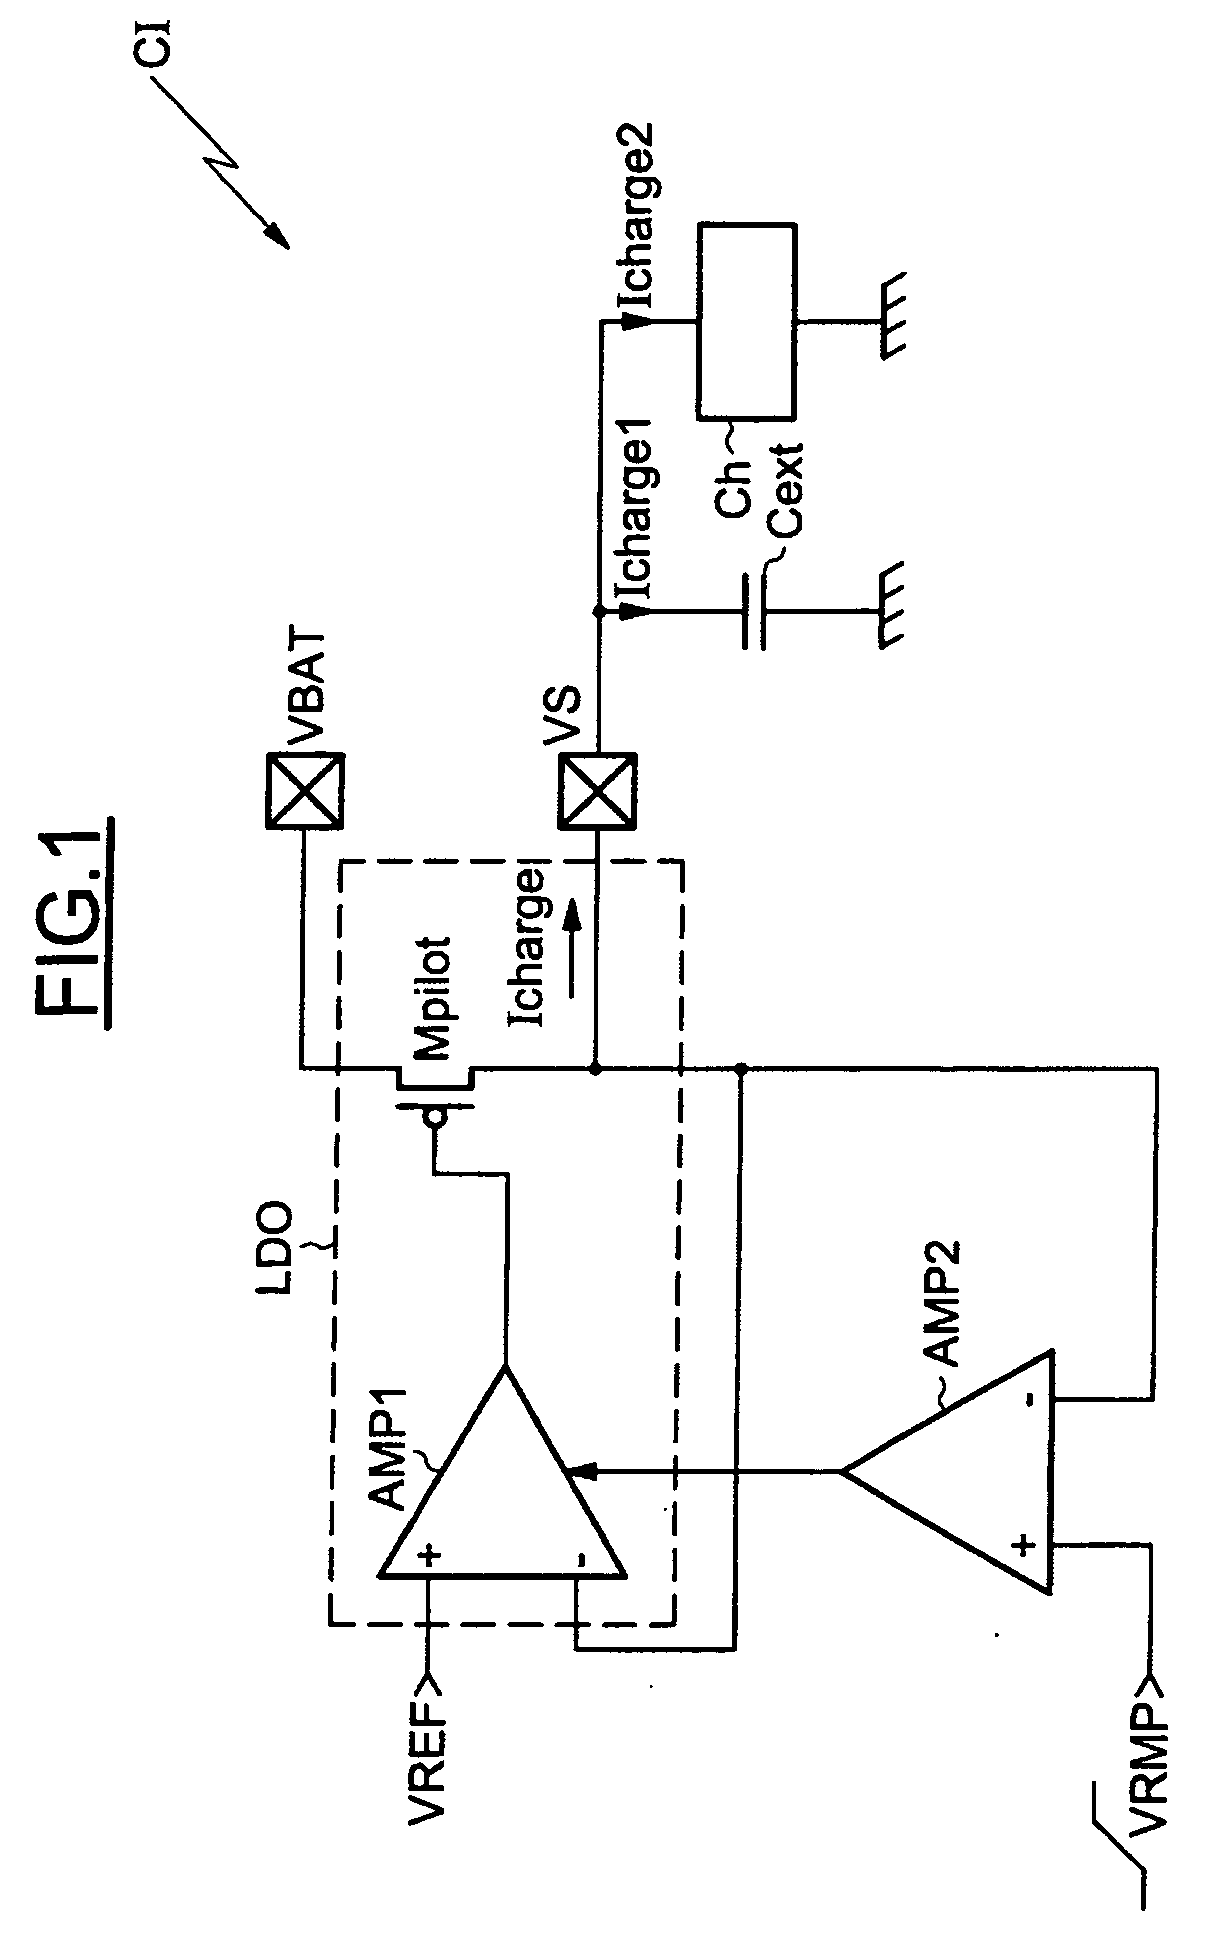 Method for controlling the operation of a low-dropout voltage regulator and corresponding integrated circuit